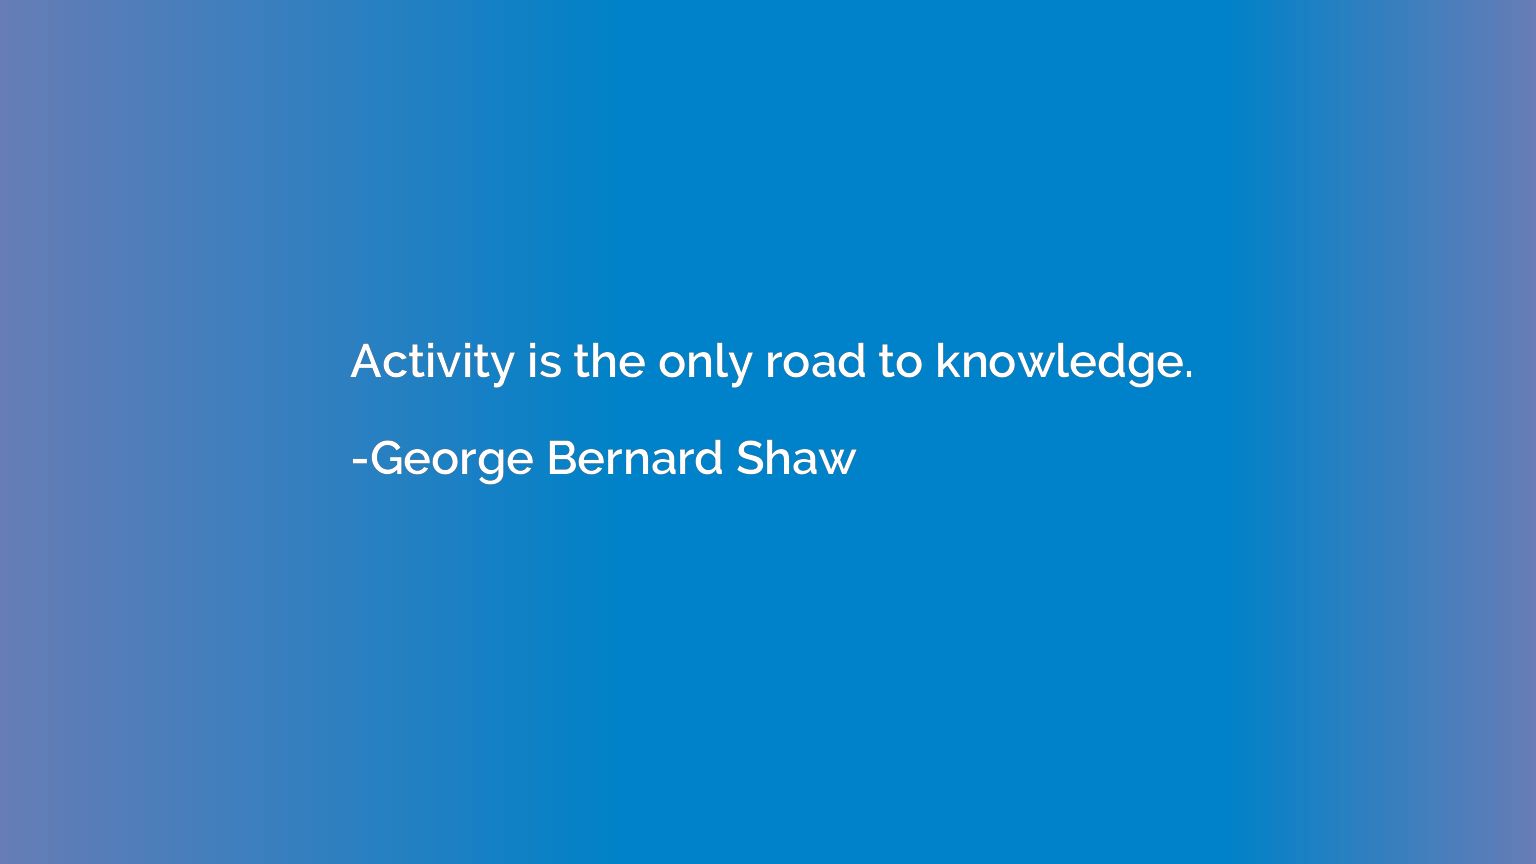 Activity is the only road to knowledge.